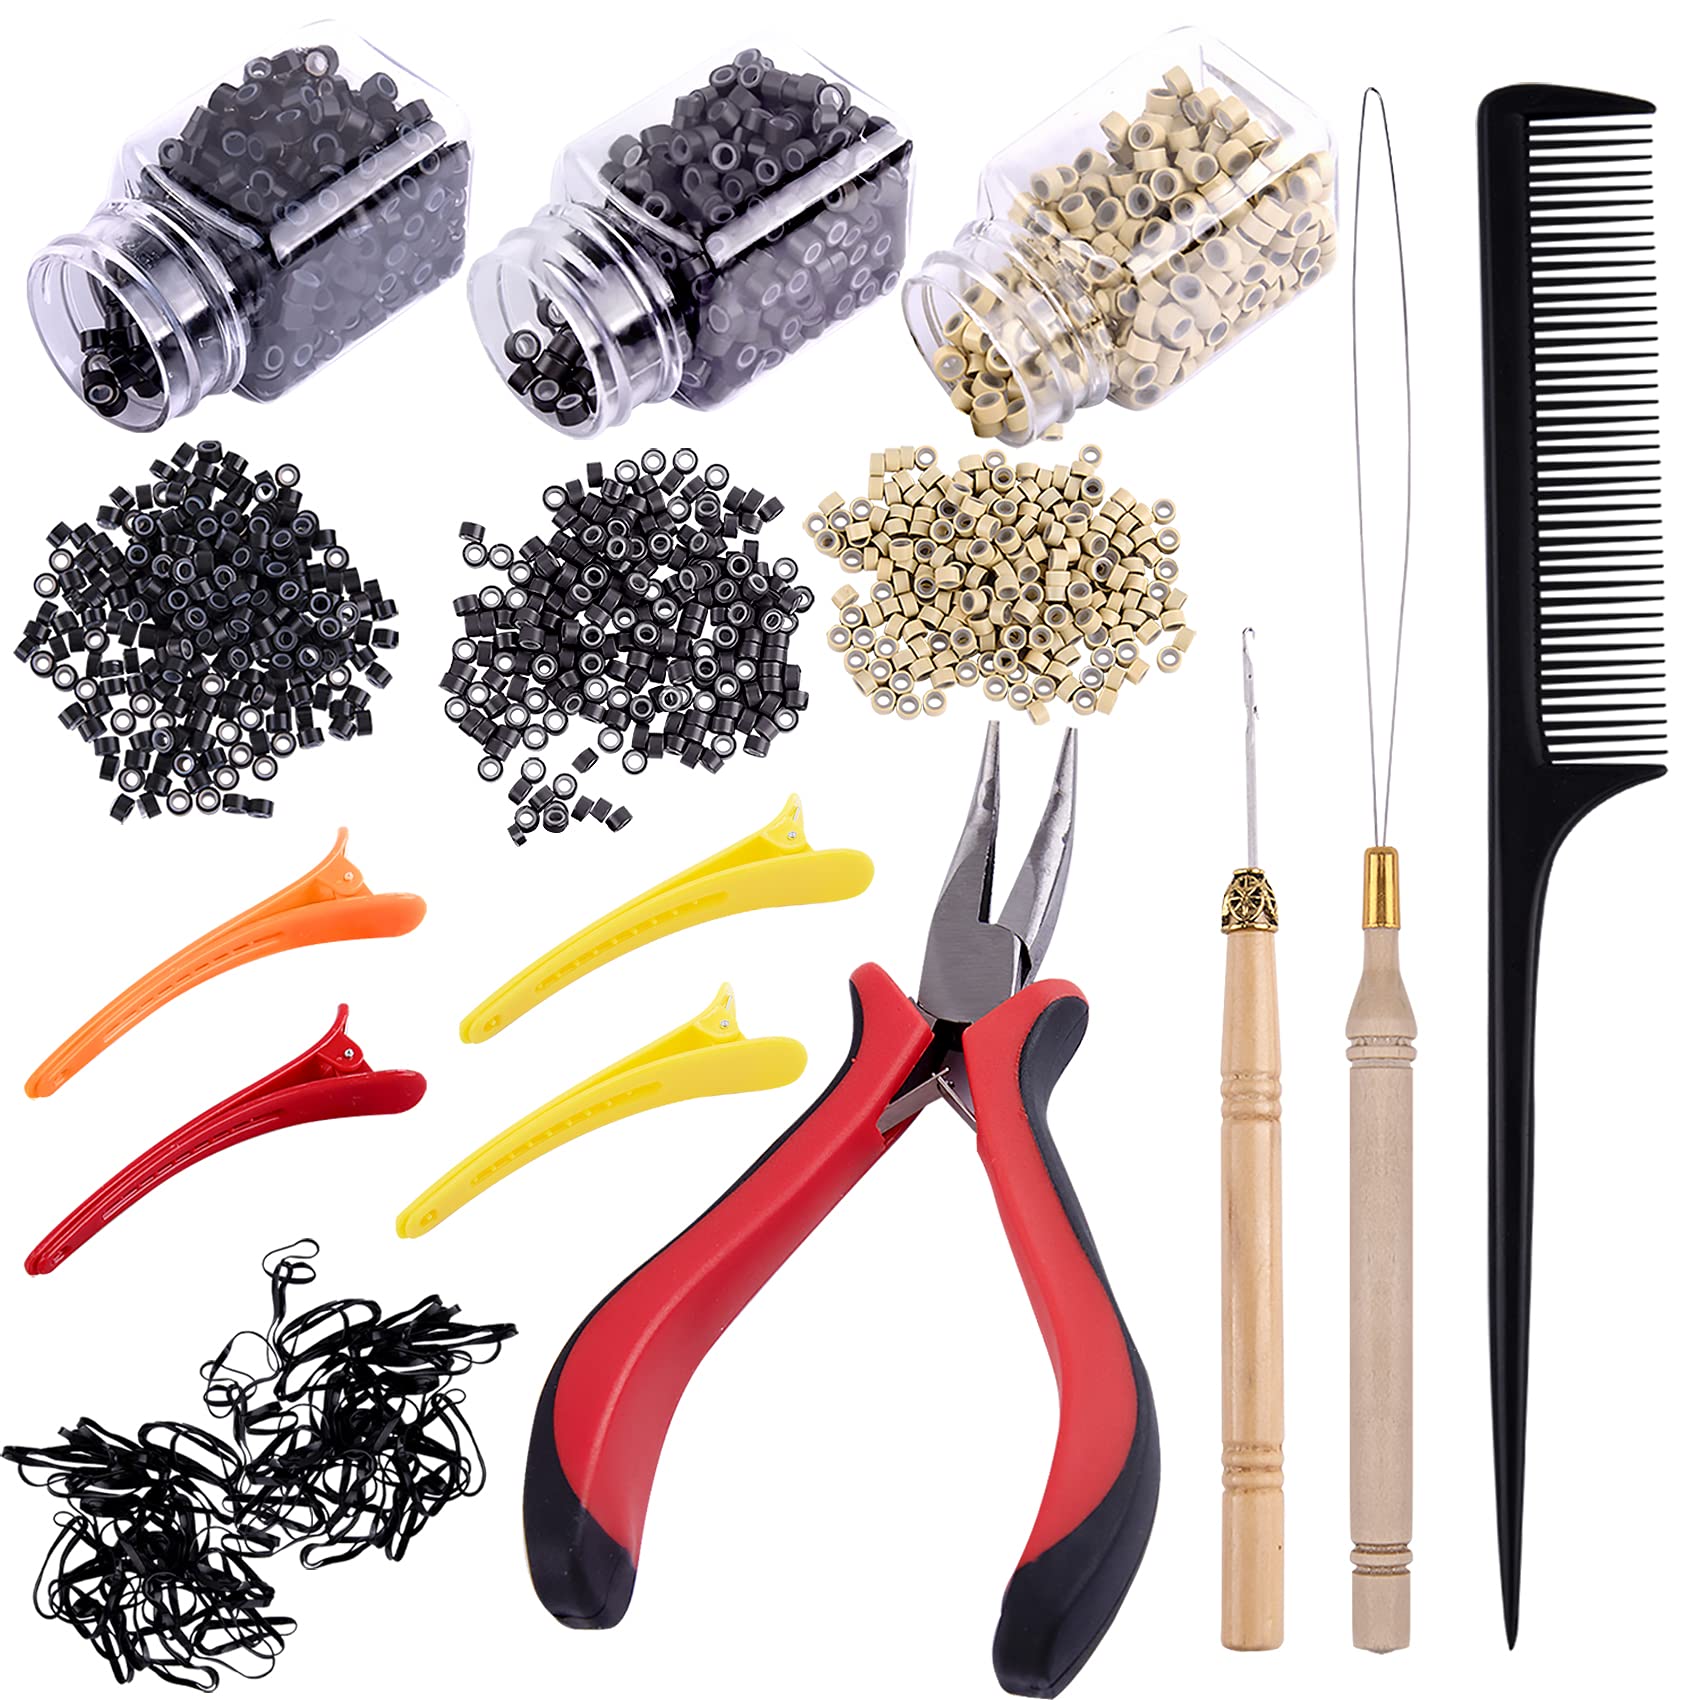 Hair Extension Tool Kit Hair Extension Remove Pliers Pulling Hook 100pcs  Dark Brown(black) Micro Silicone ring Bead Device Tool Kits for  Professional Hair Styling Tools Accessory